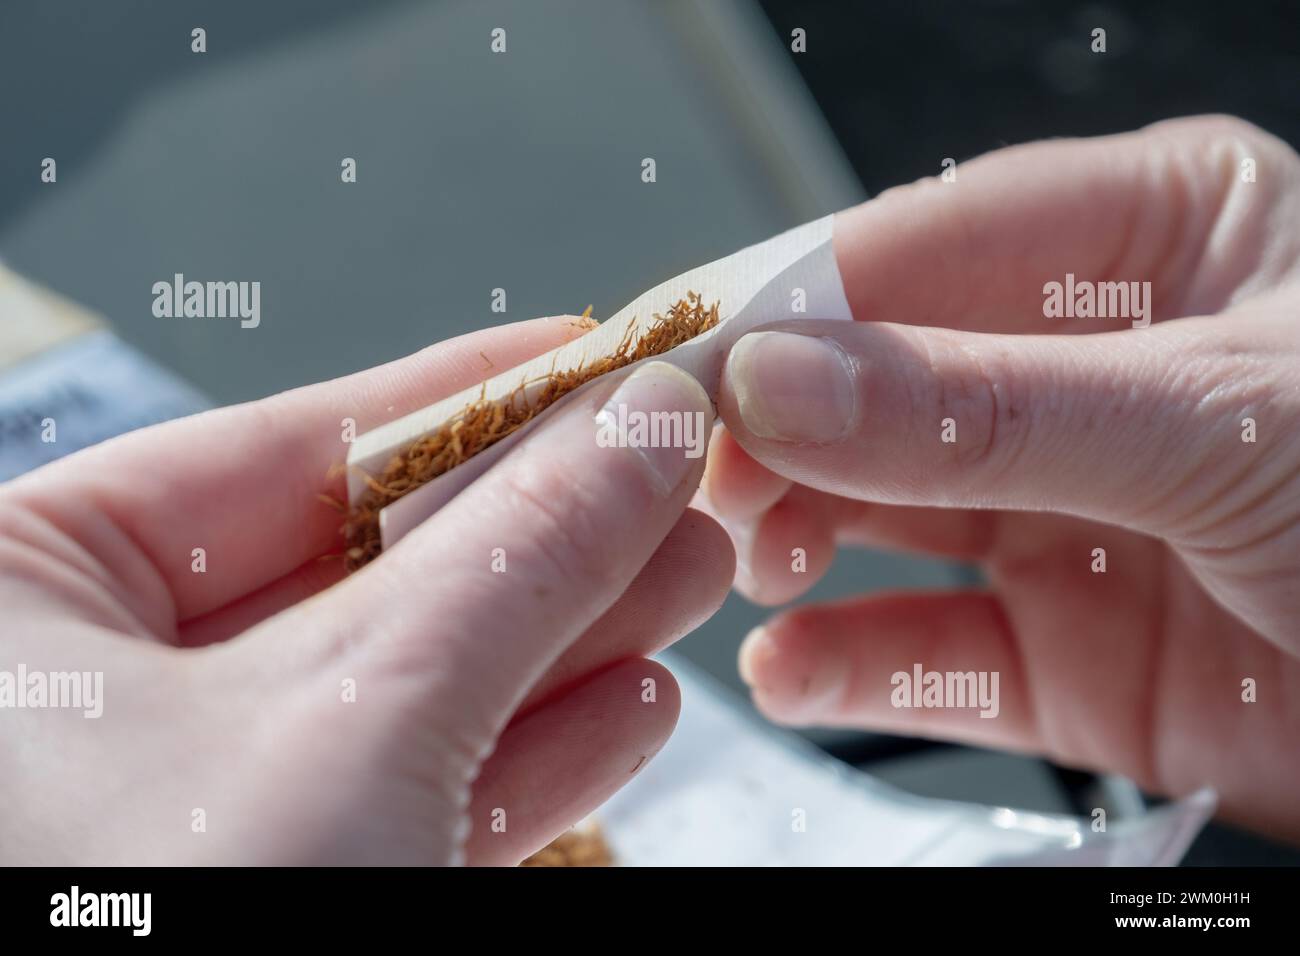 female fingers roll a cigarette, two hands skillfully turn a hand-rolled cigarette with their fingers, tobacco and paper Stock Photo